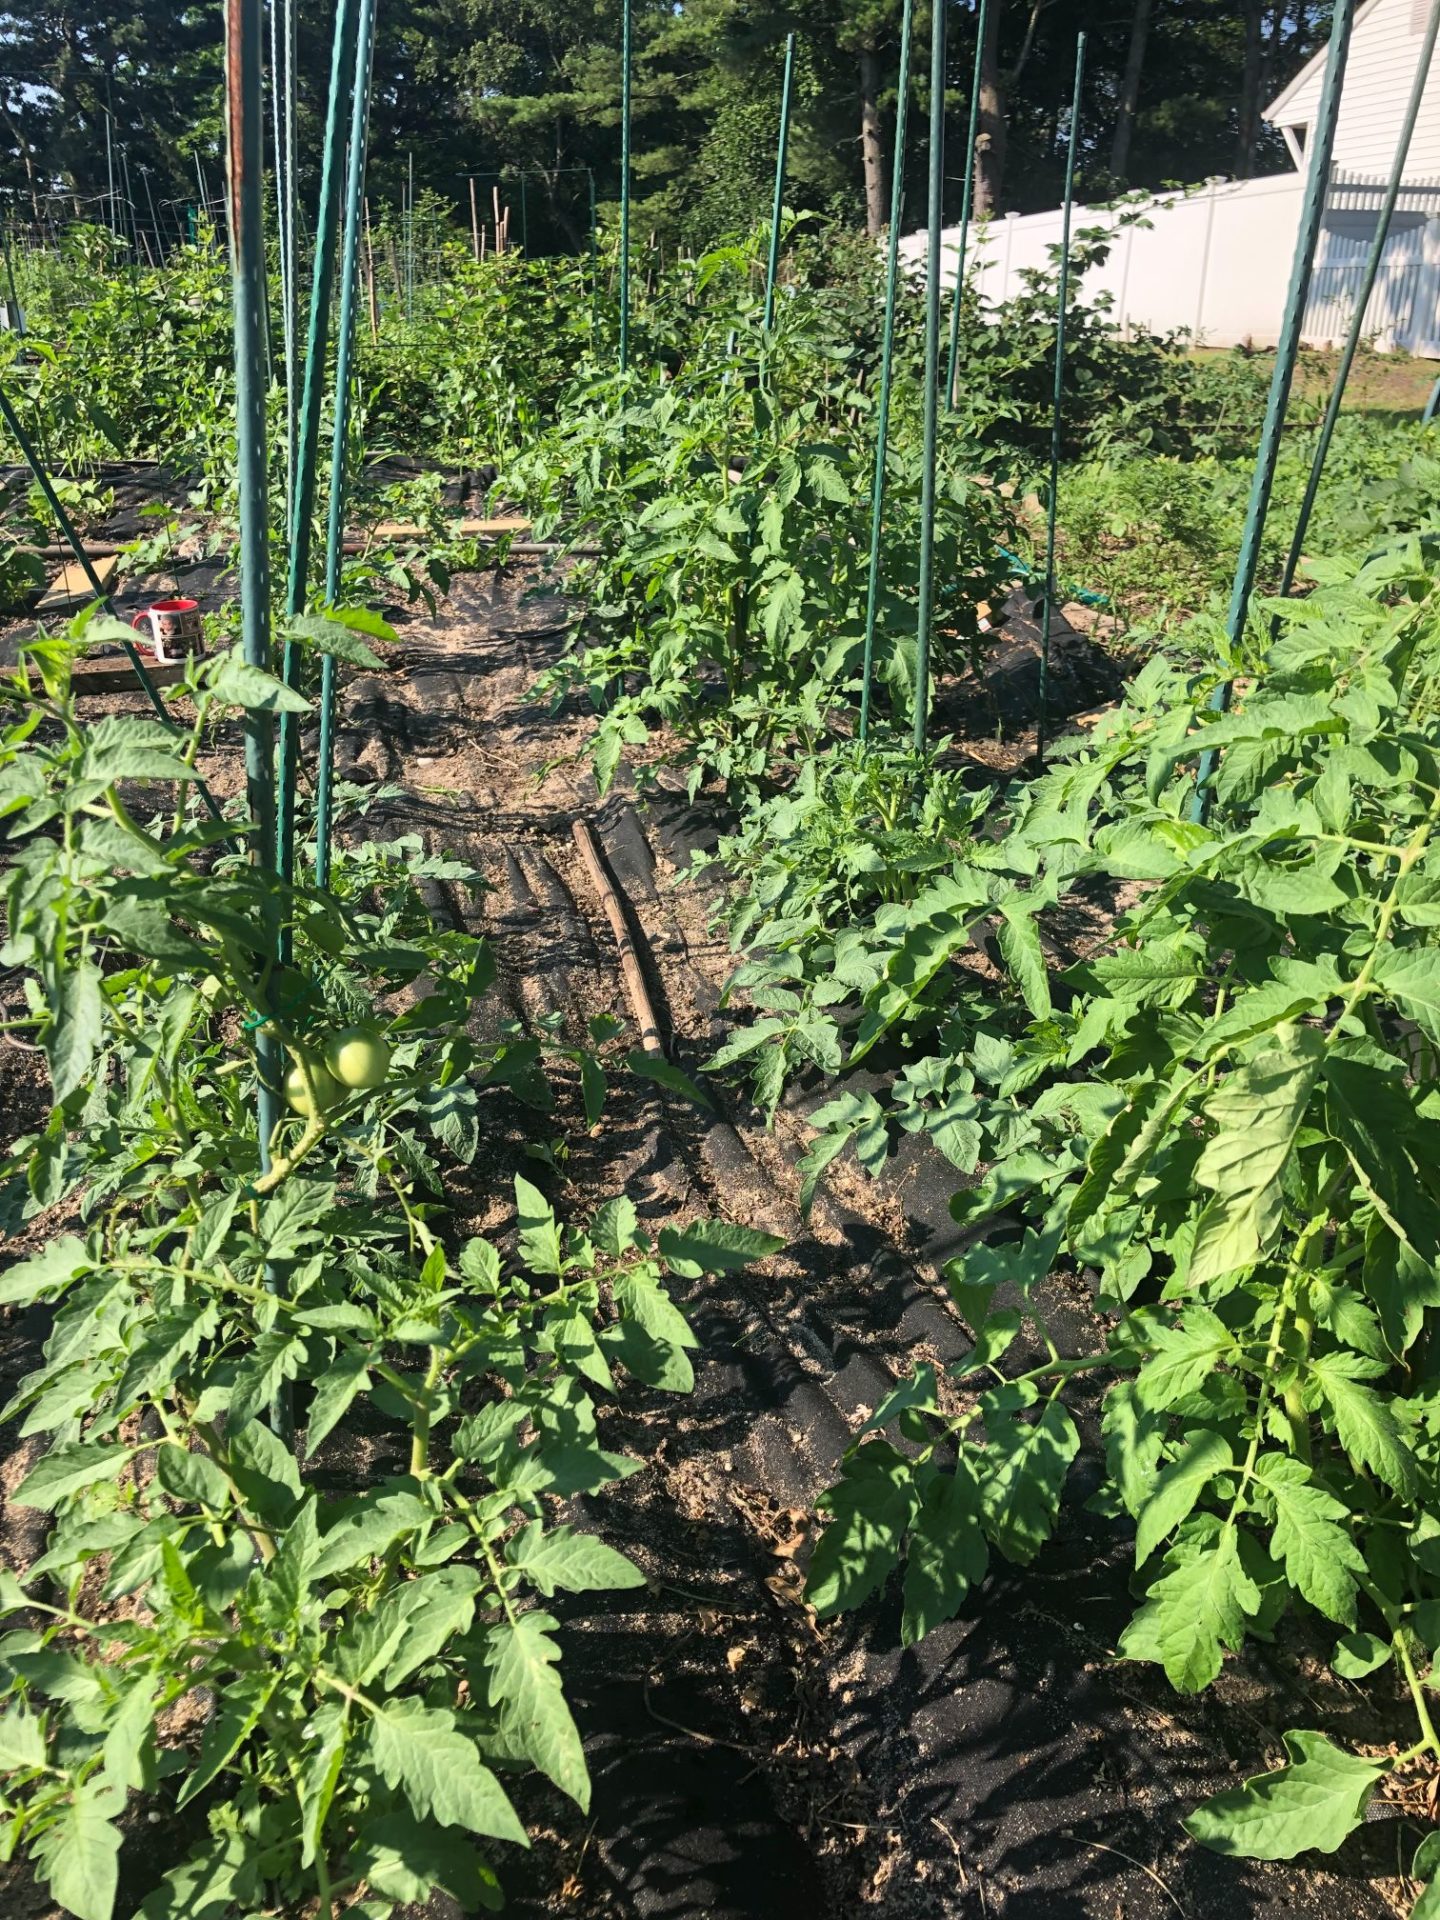 Rows of tomatoes growing in the garden.